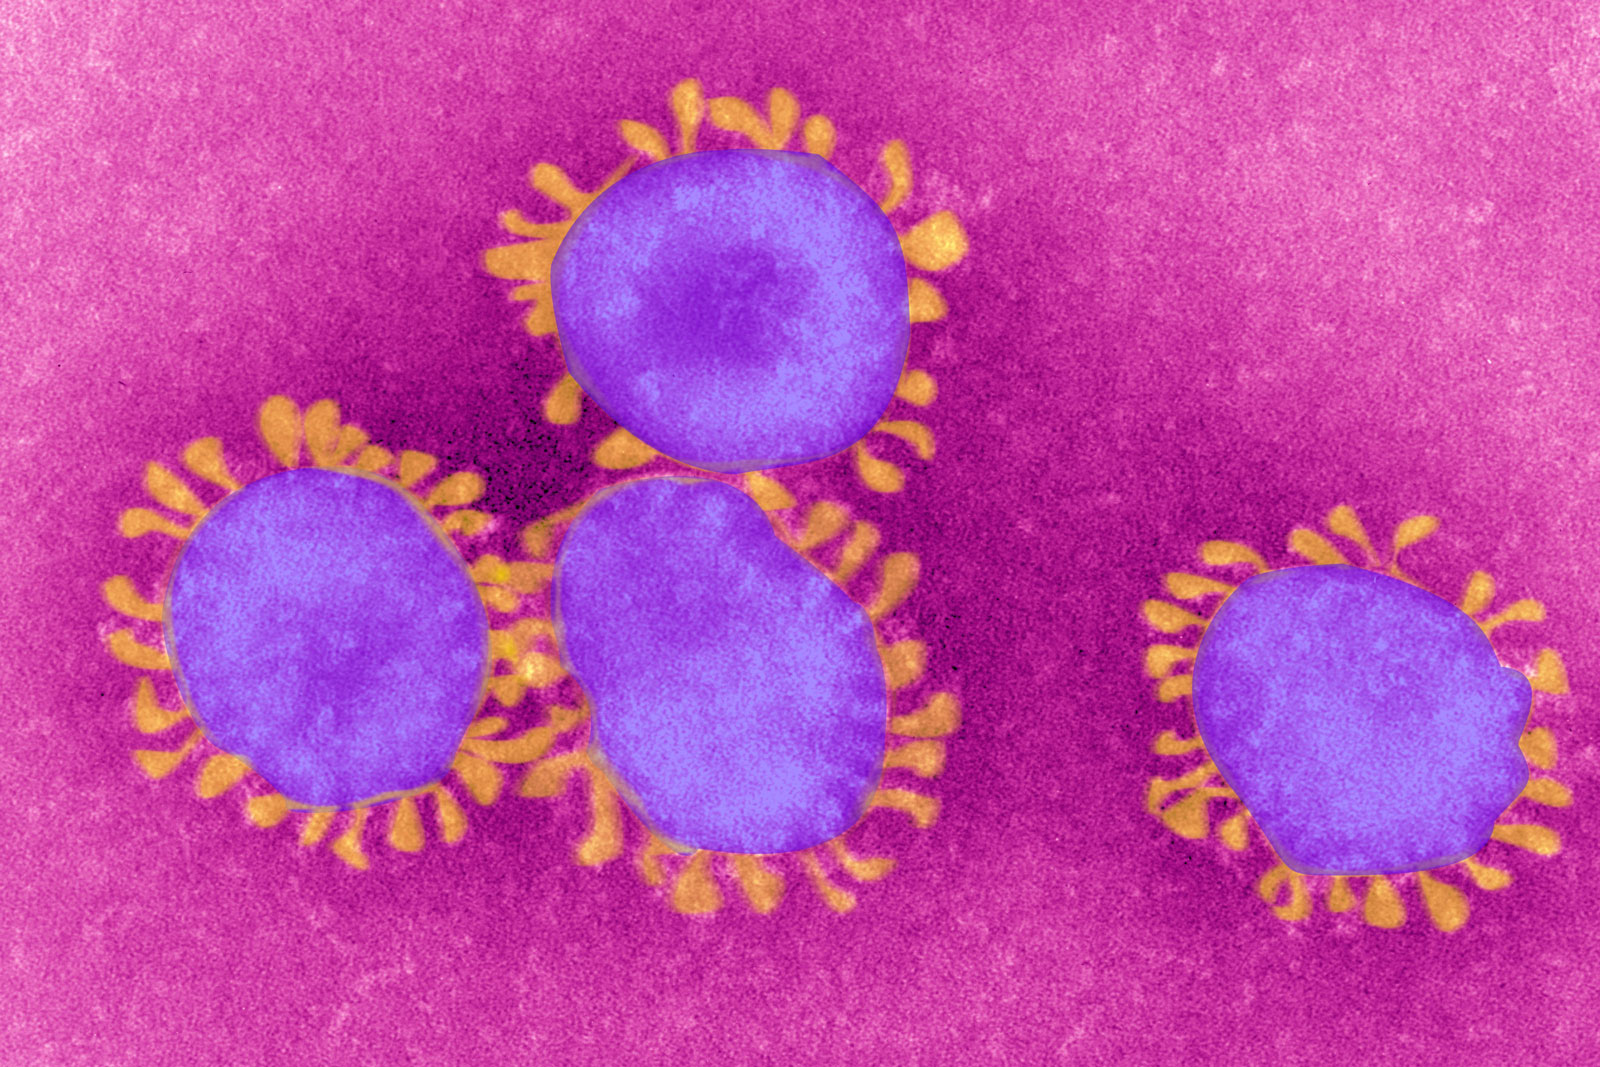 A colorized image of a coronavirus made from transmission electron microscopy, February 21, 2008